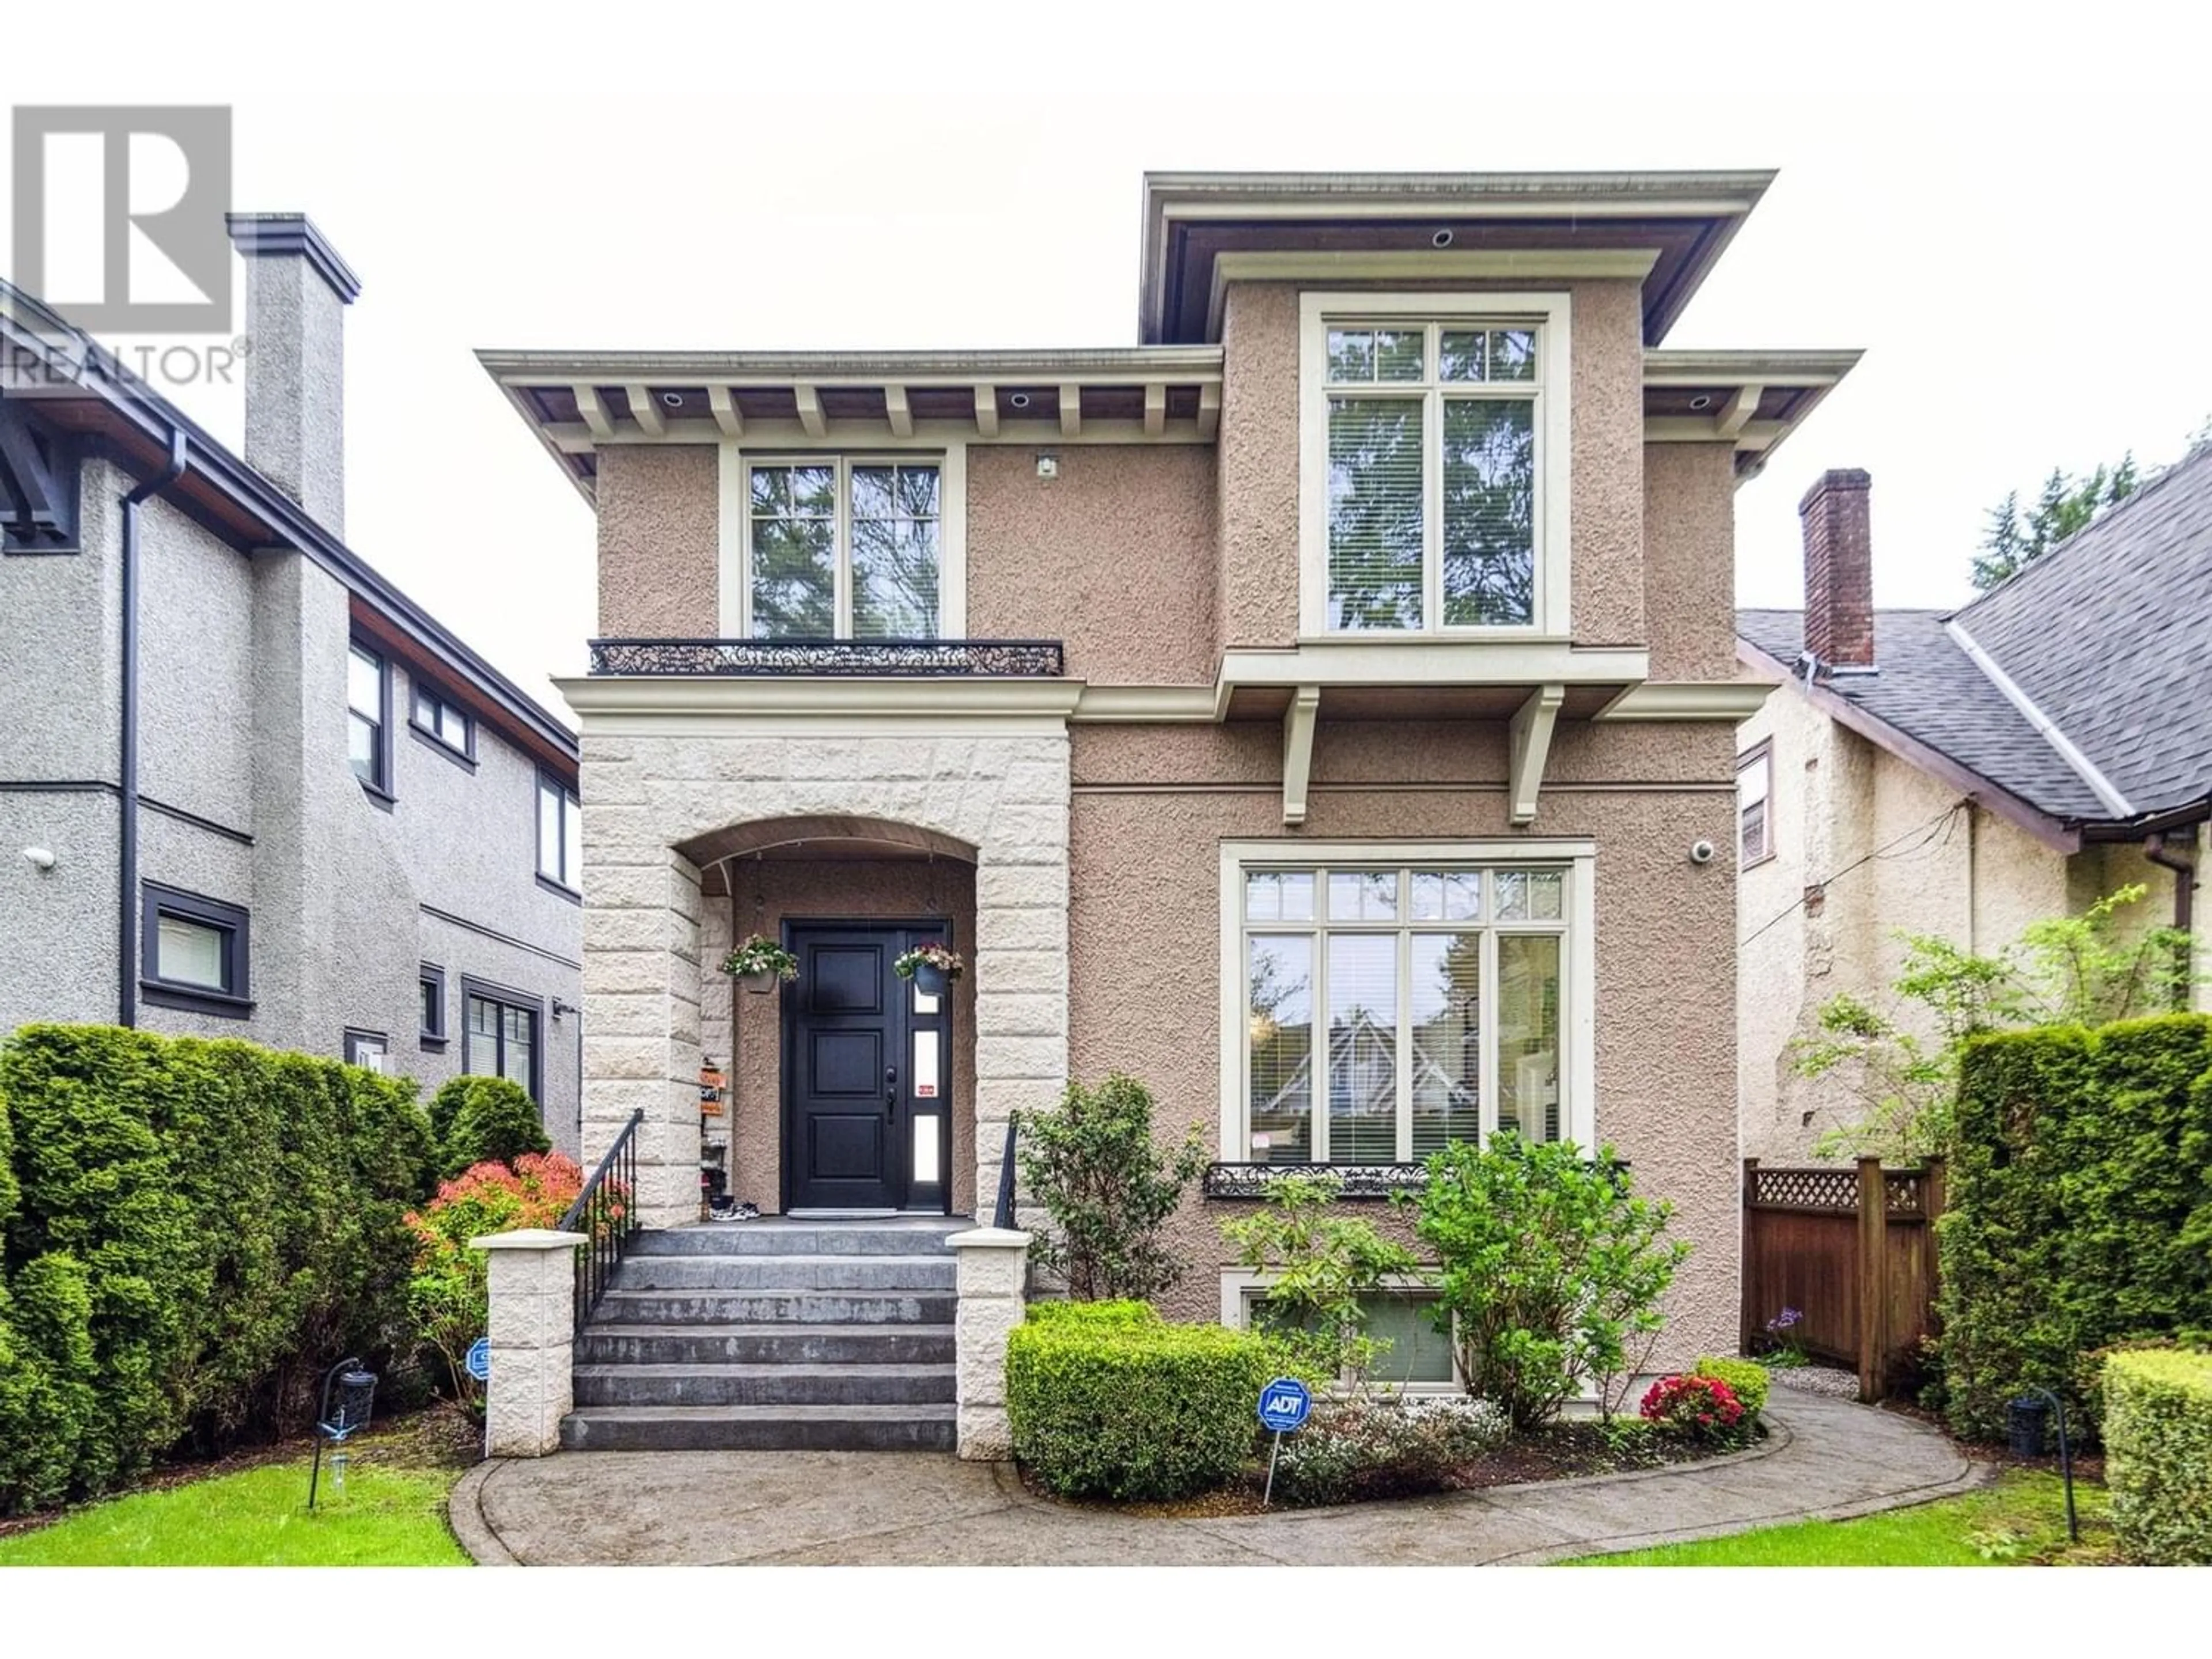 Home with brick exterior material for 2838 W 15TH AVENUE, Vancouver British Columbia V6K2Z9